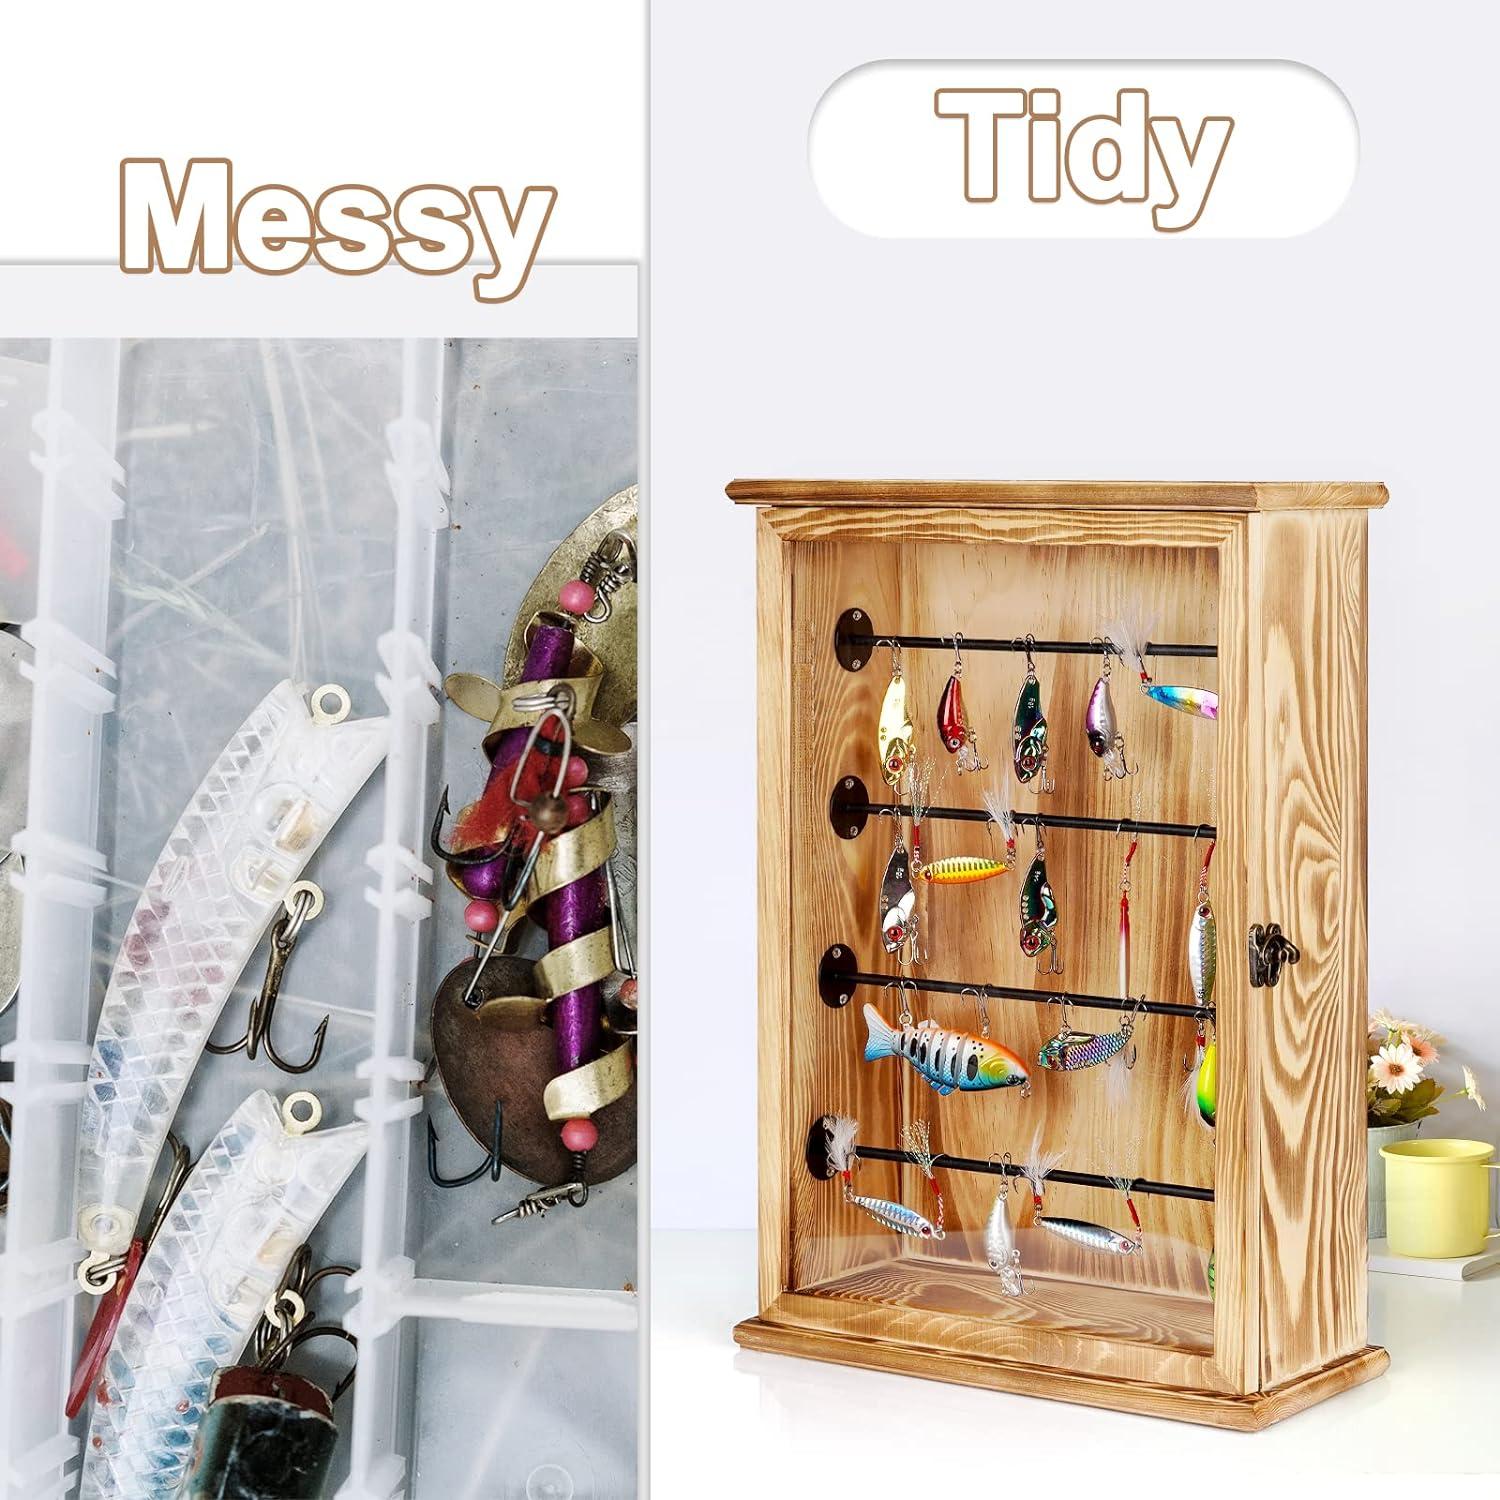 Ibnotuiy Fishing Lures Storage Display Case Wall Cabinet Tackle Box  Organizer Fishing Gifts for Men with Door and Lockable for Study Room, Man  Cave